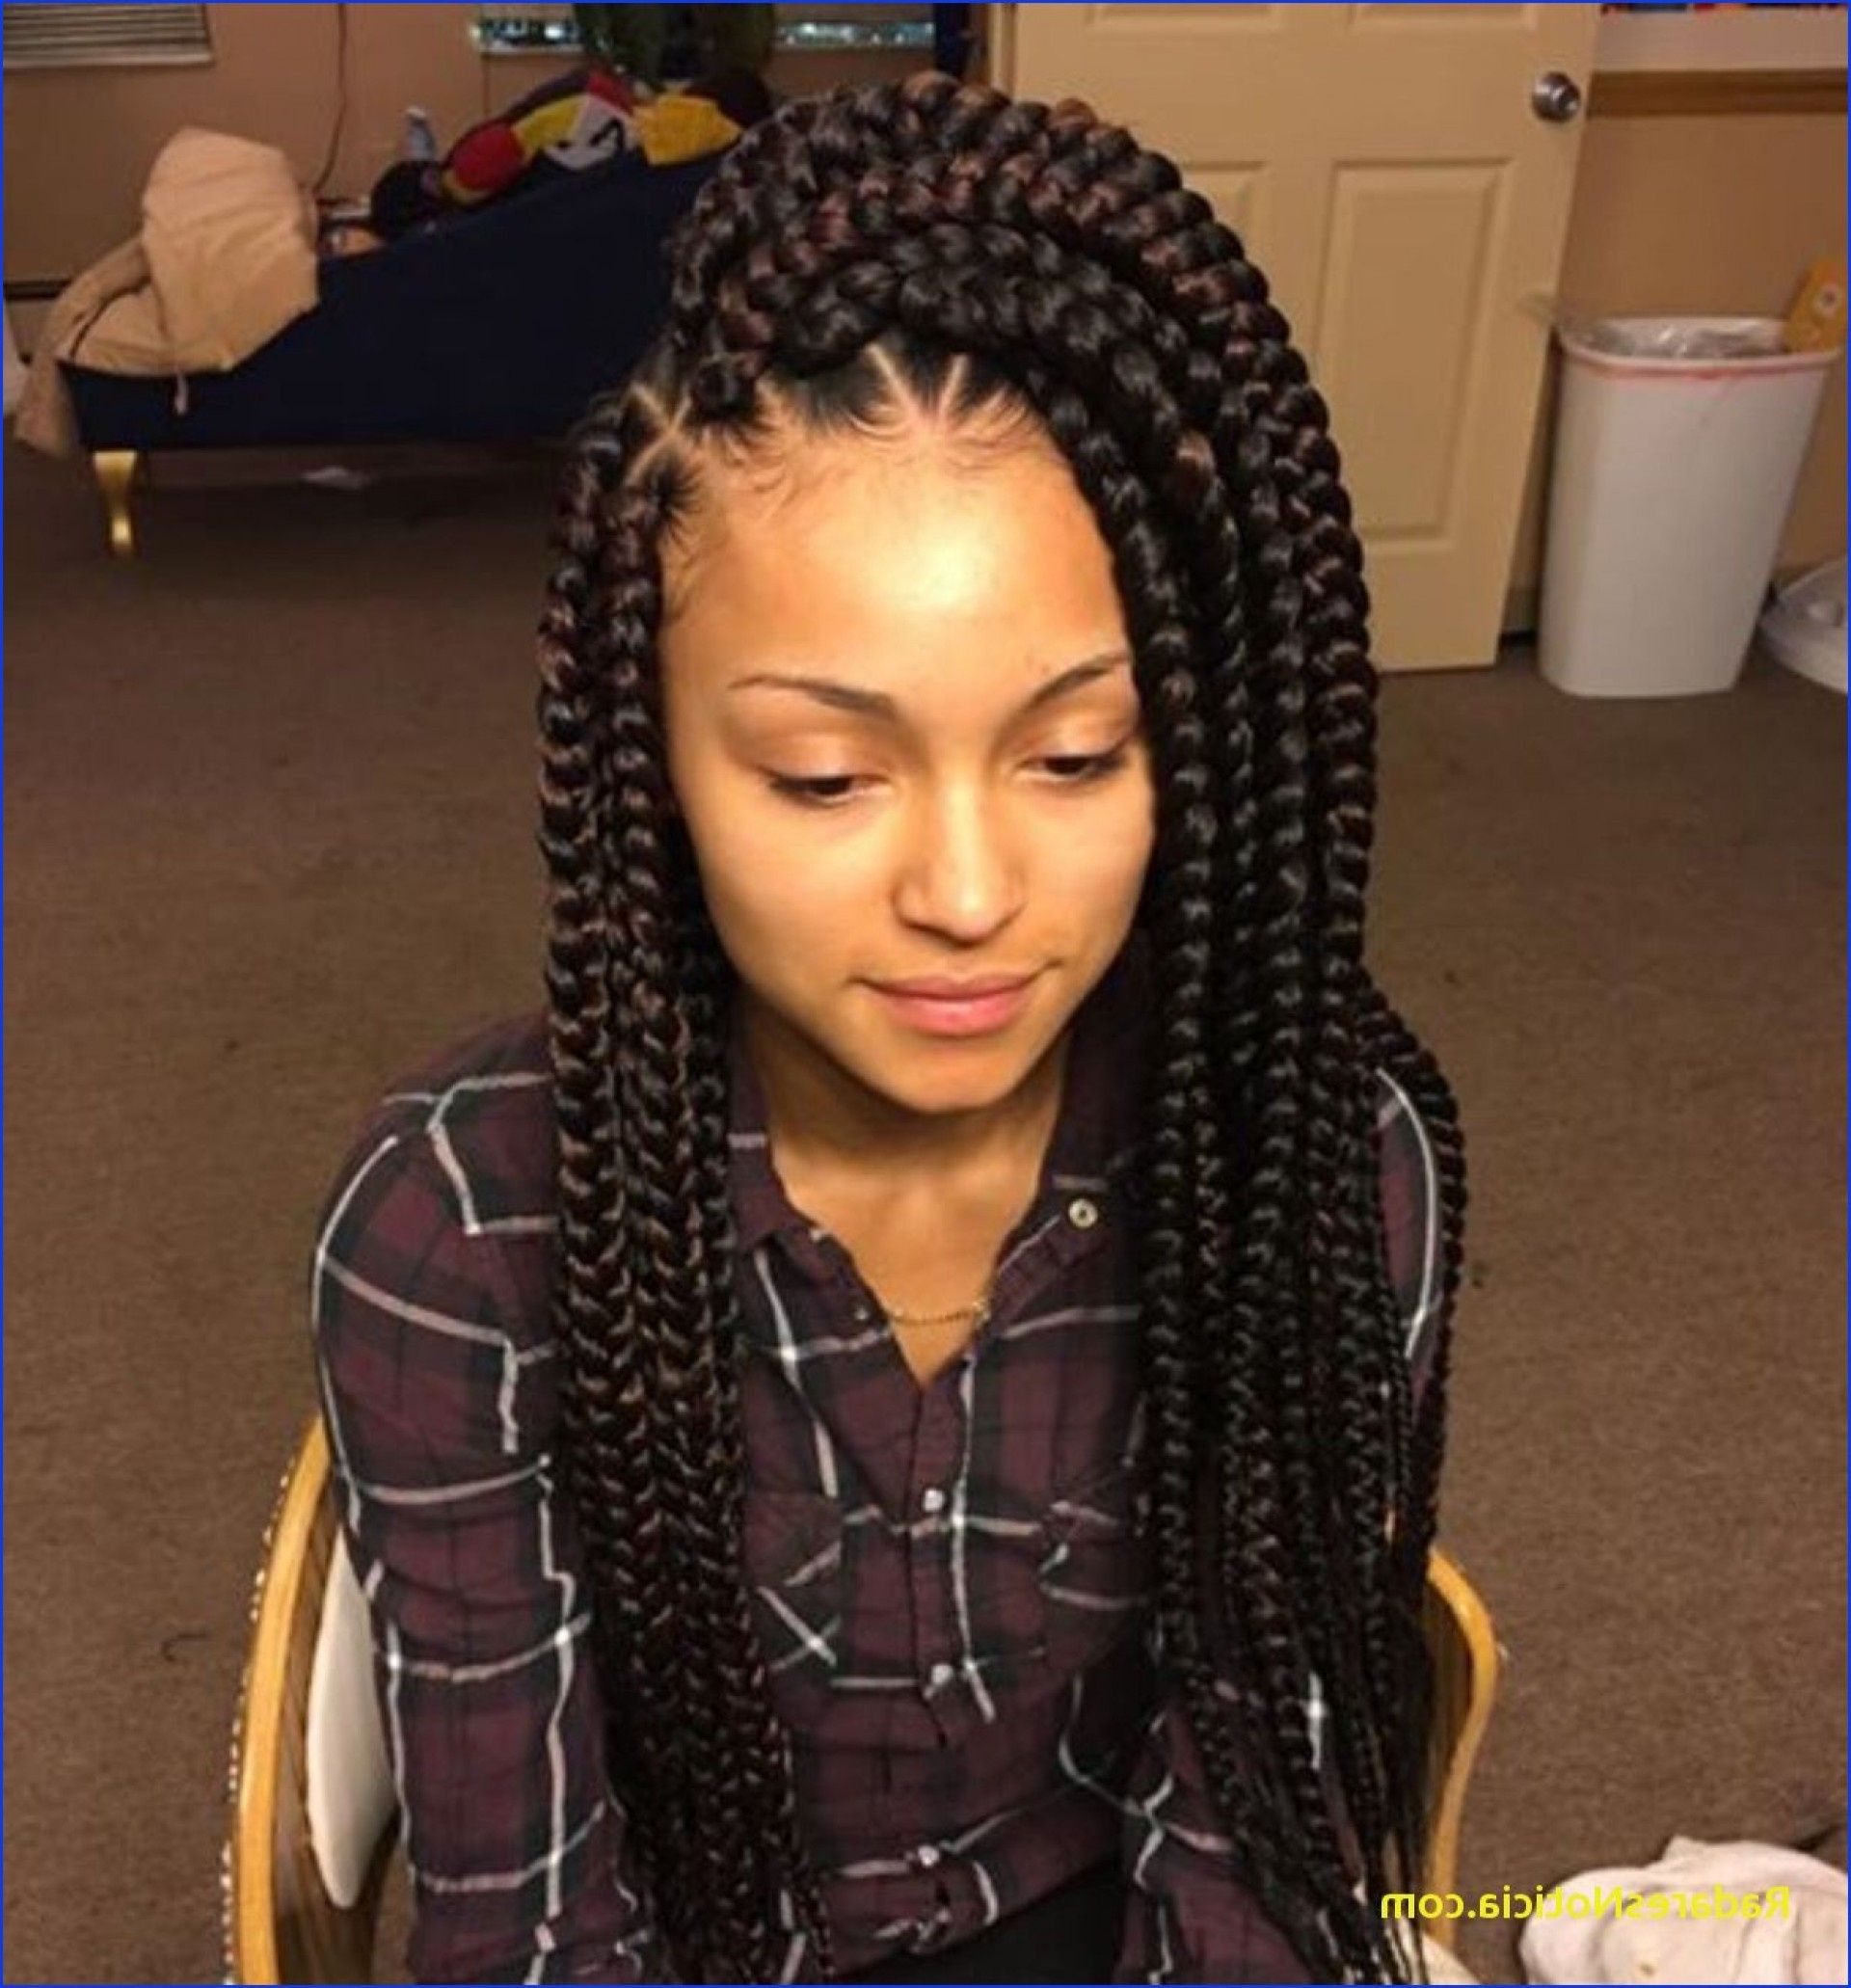 Fashion : Big Box Braids Cheap Braid Big Braid Hairstyles For Most Up To Date Twists And Braid Hairstyles (View 12 of 20)